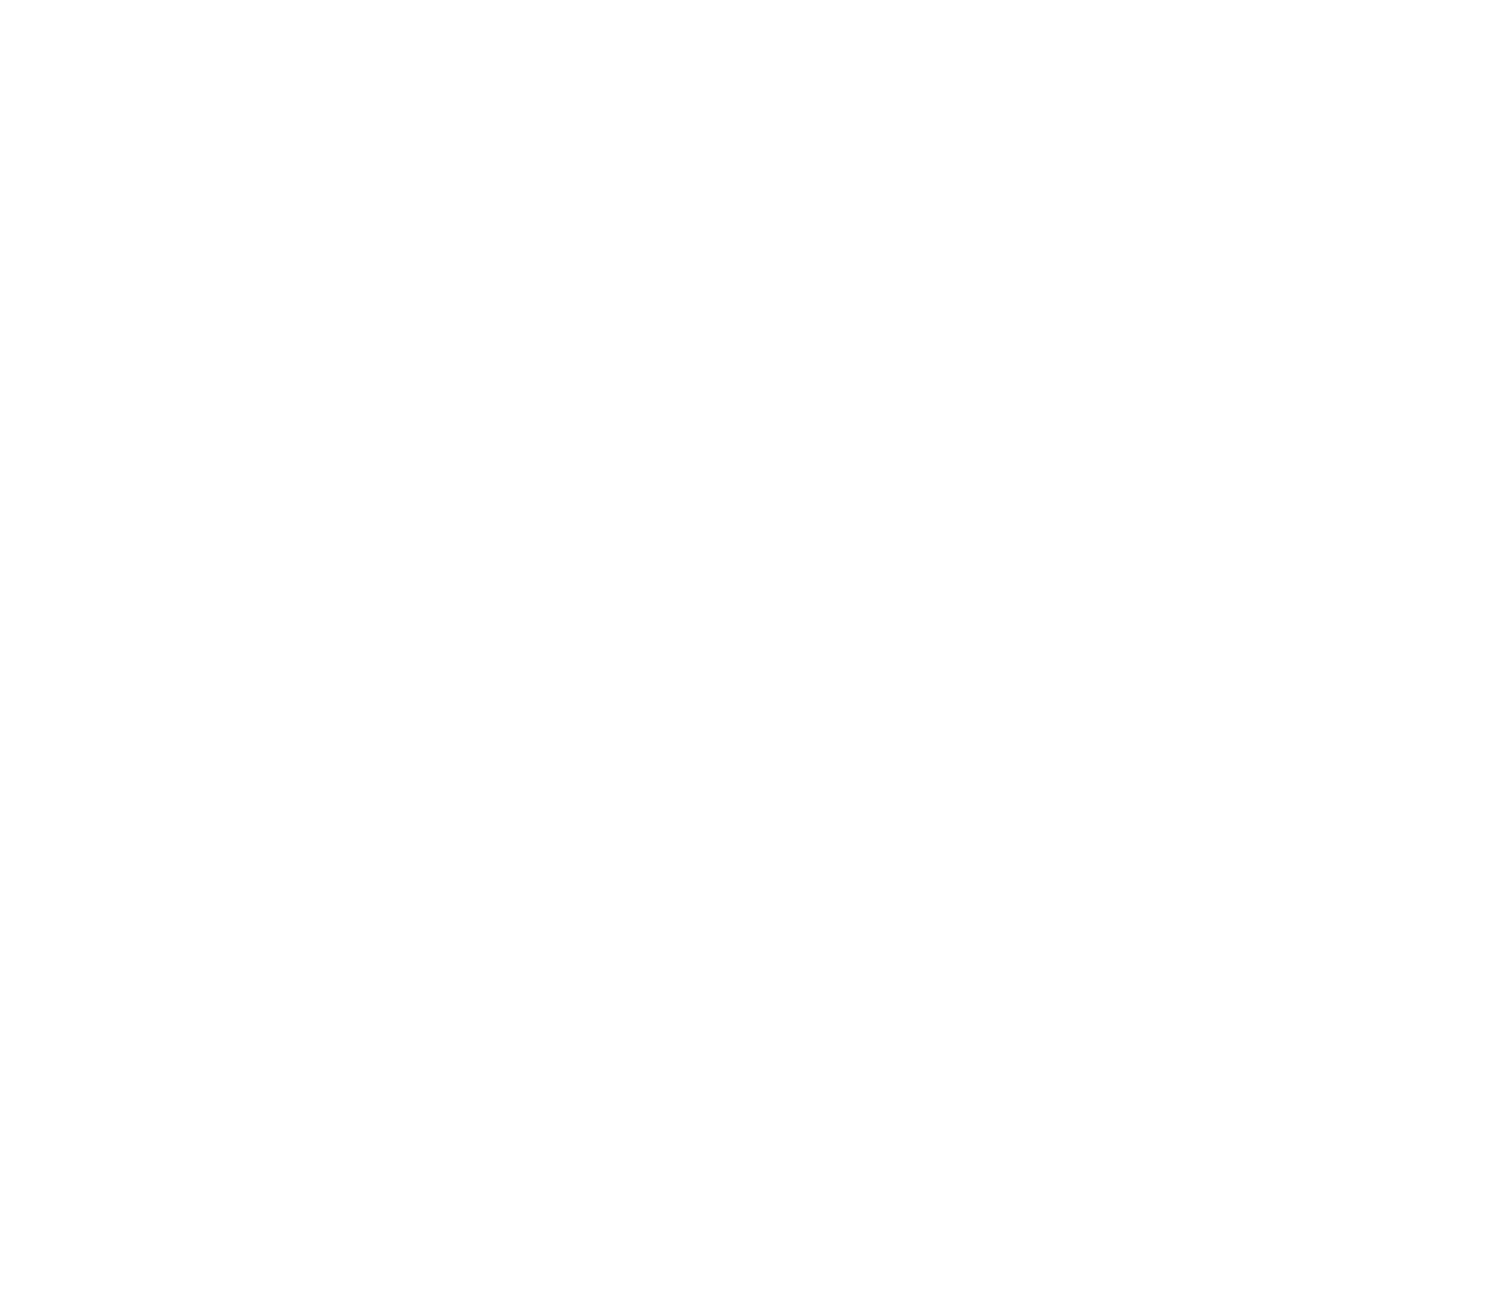 Transgender Resource Center of New Mexico